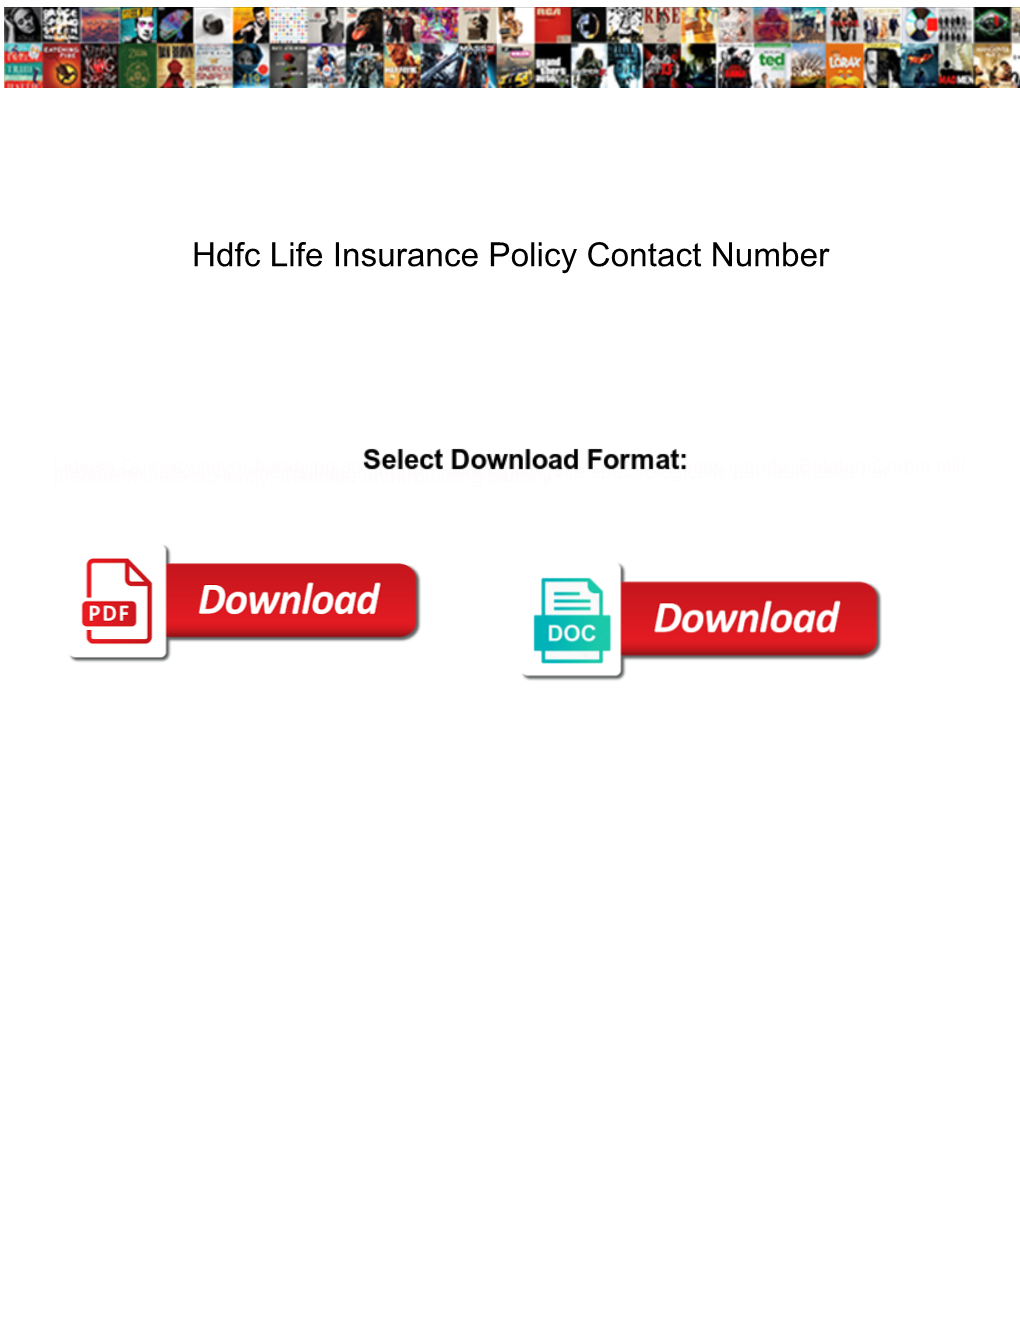 Hdfc Life Insurance Policy Contact Number